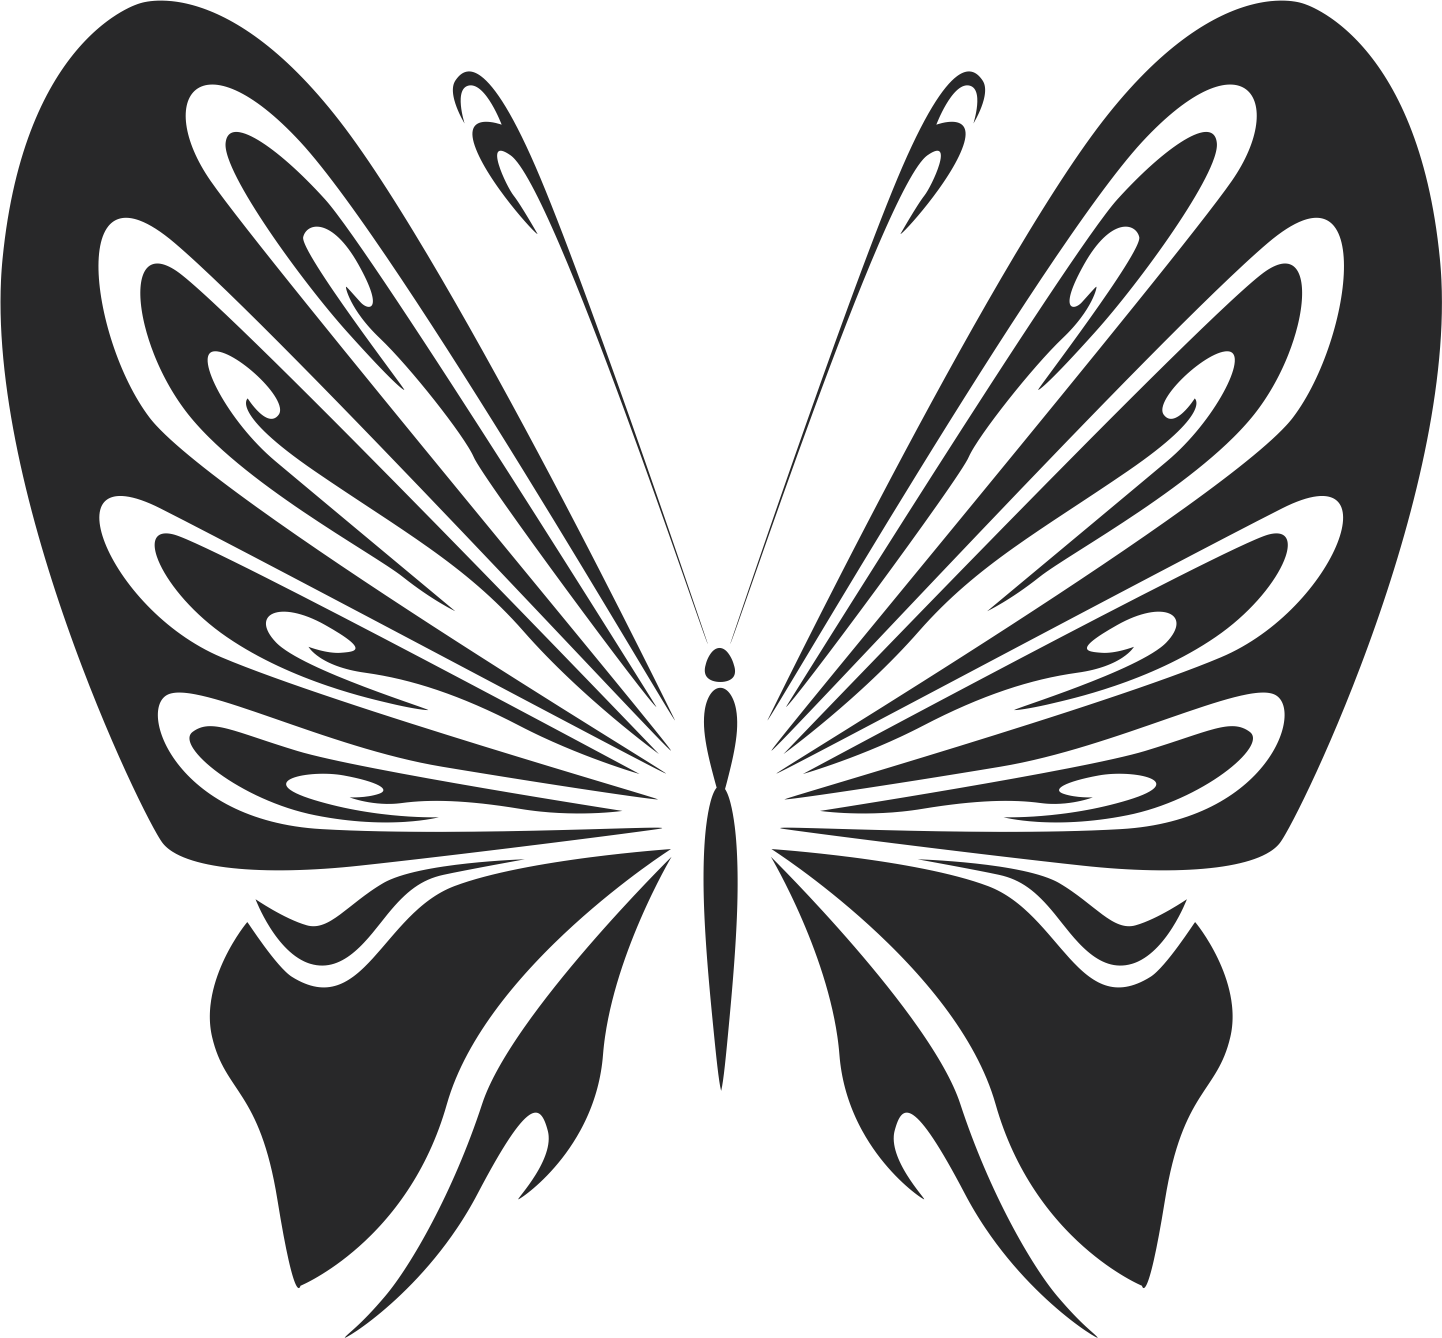 Vintage Butterfly Stencils Free Vector cdr Download - 3axis.co